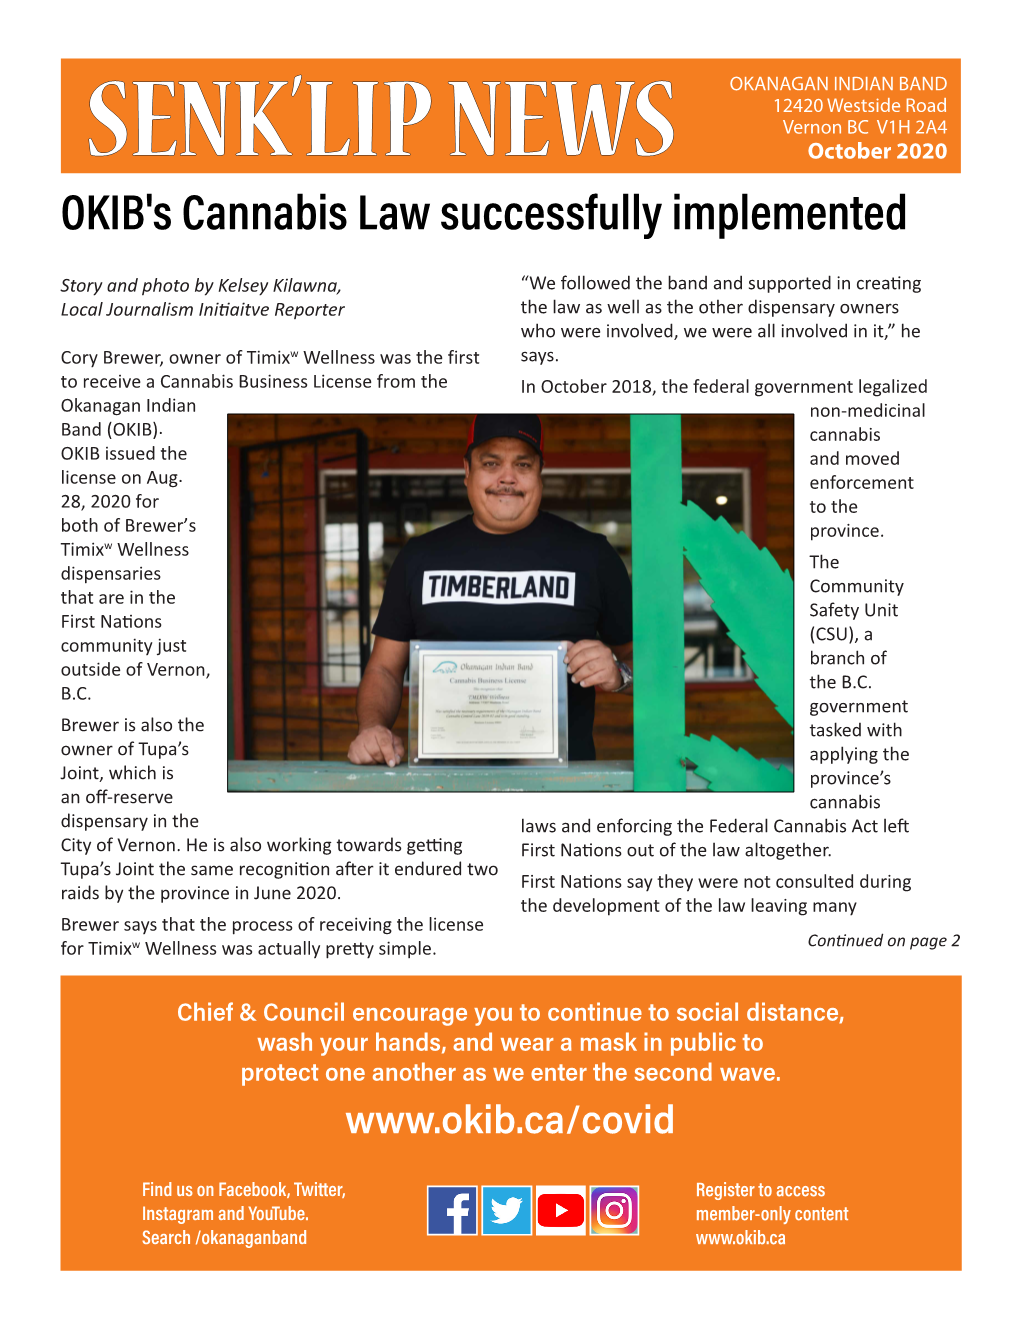 OKIB's Cannabis Law Successfully Implemented